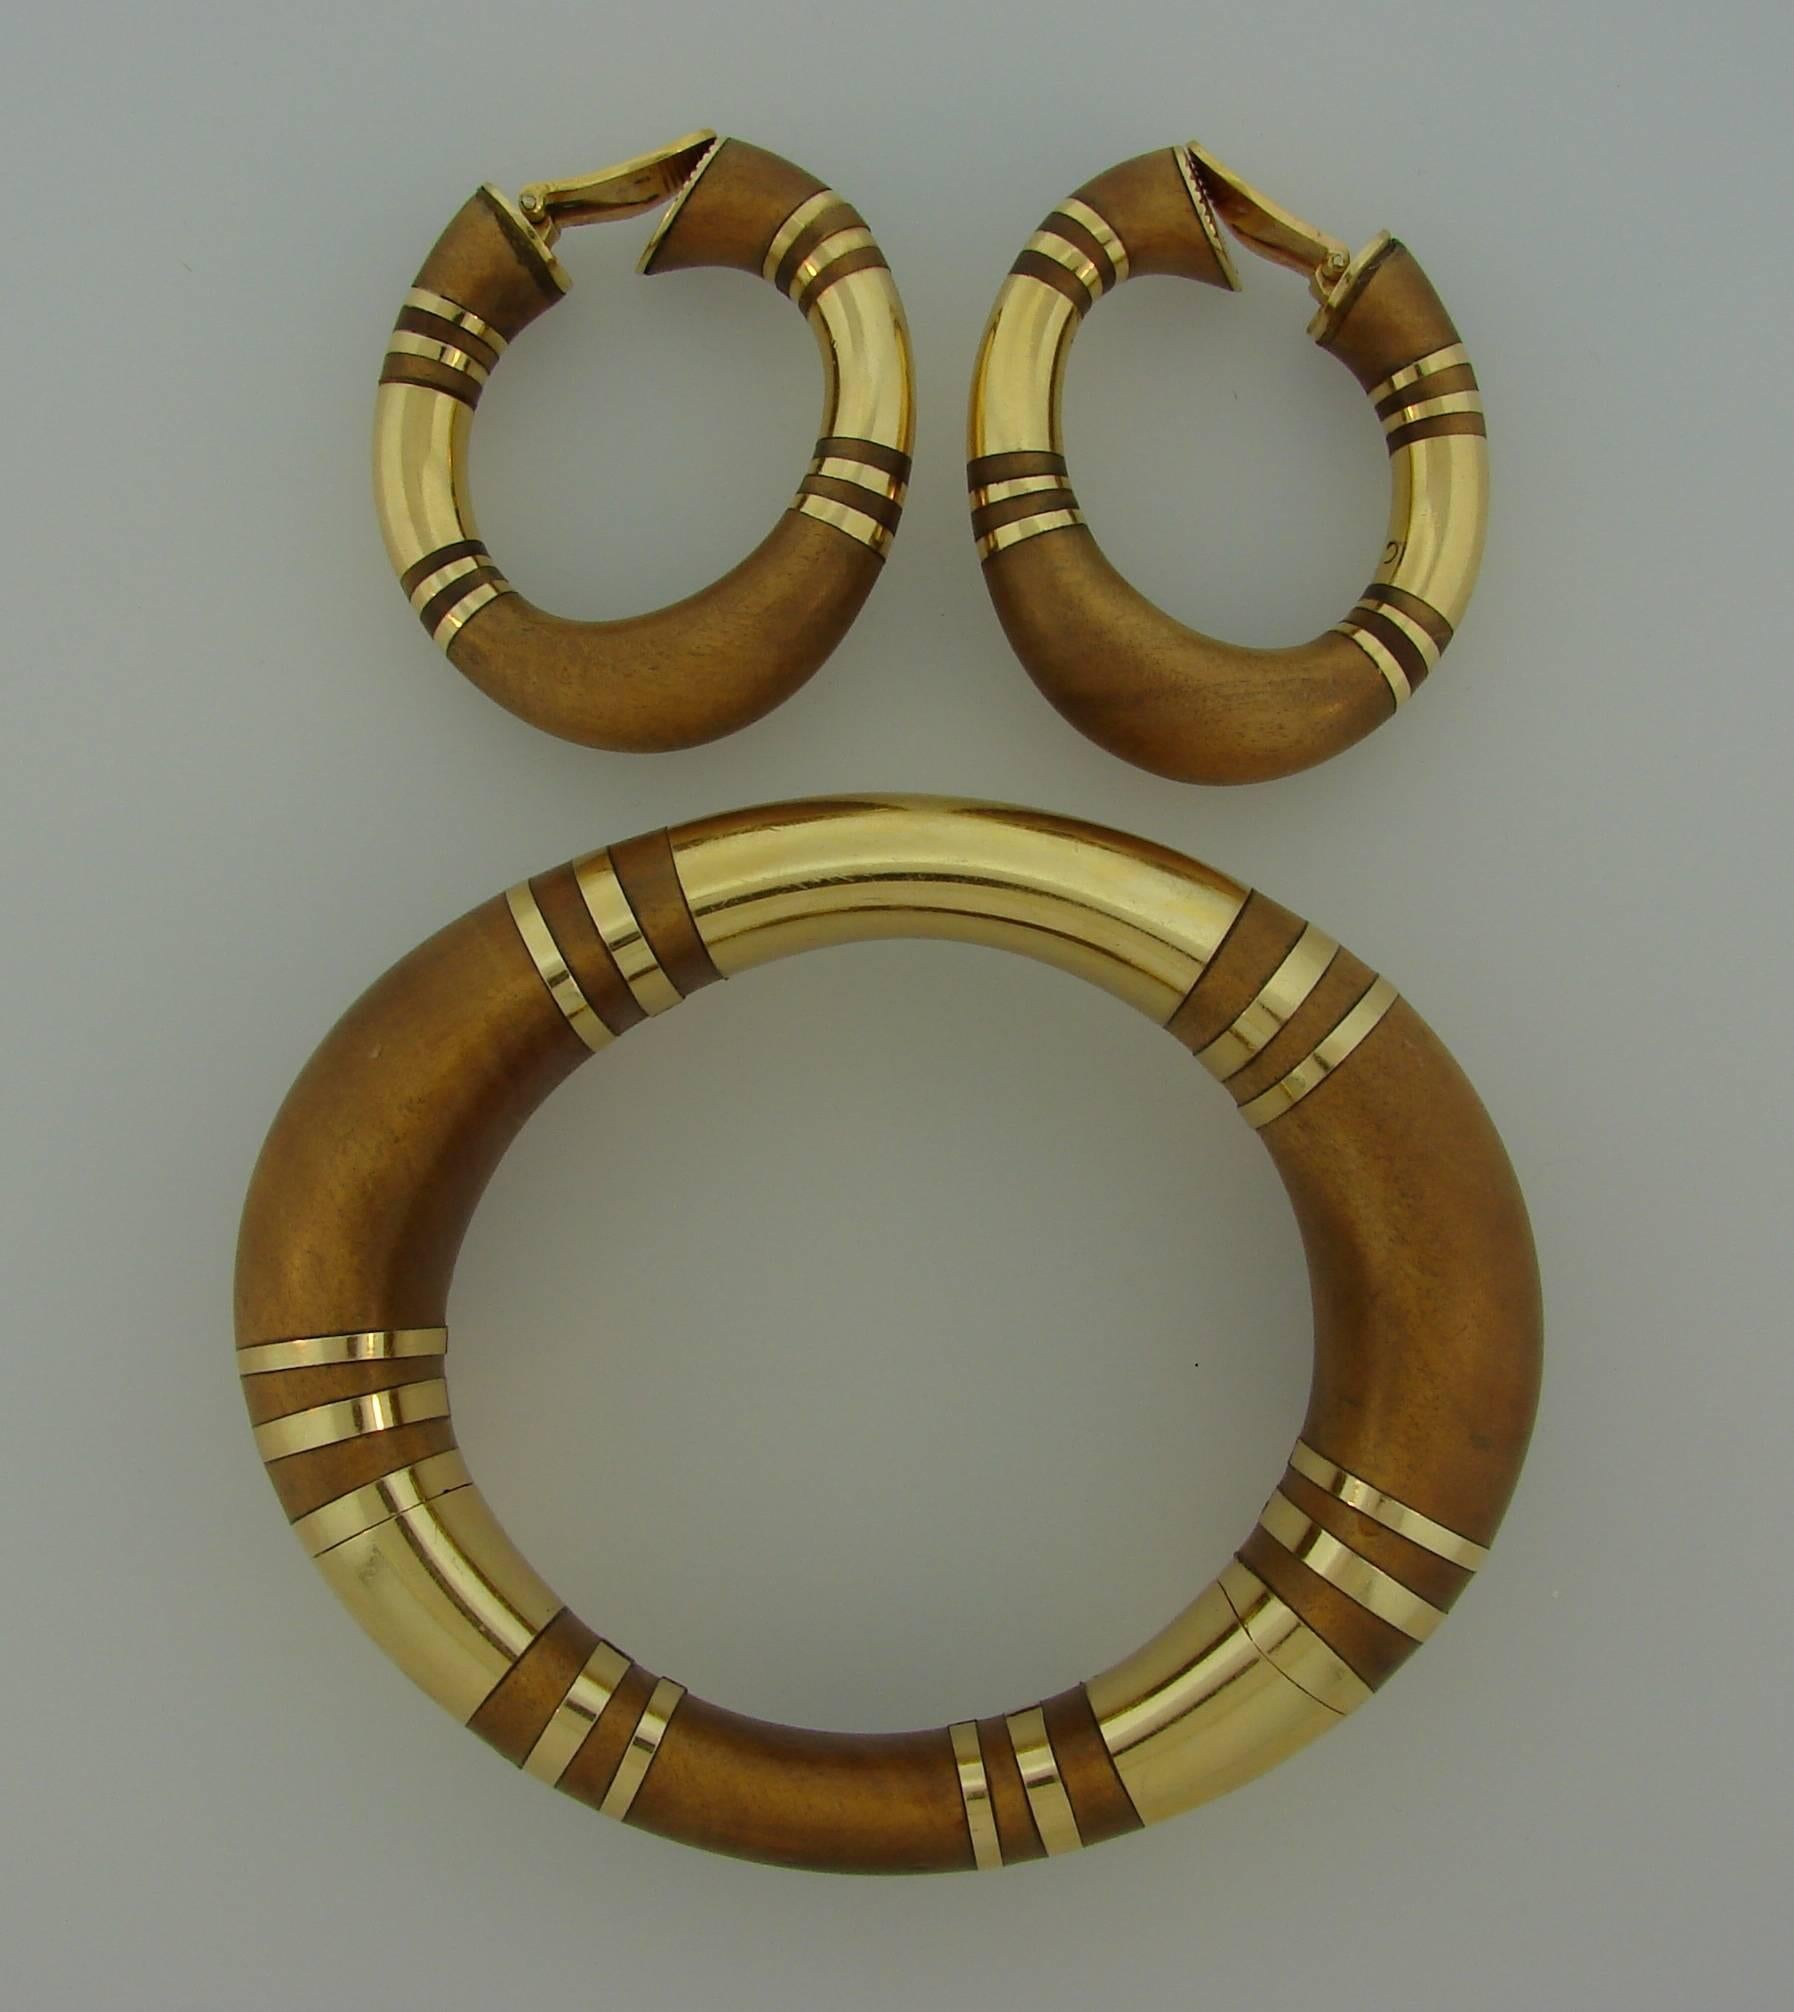 Bold yet elegant set consisting of a bangle bracelet and a pair of earrings. Created by Rene Boivin in France. Perfect proportions, beautiful curves and organic combination of wood and gold are the highlights of this gorgeous set. Chic and